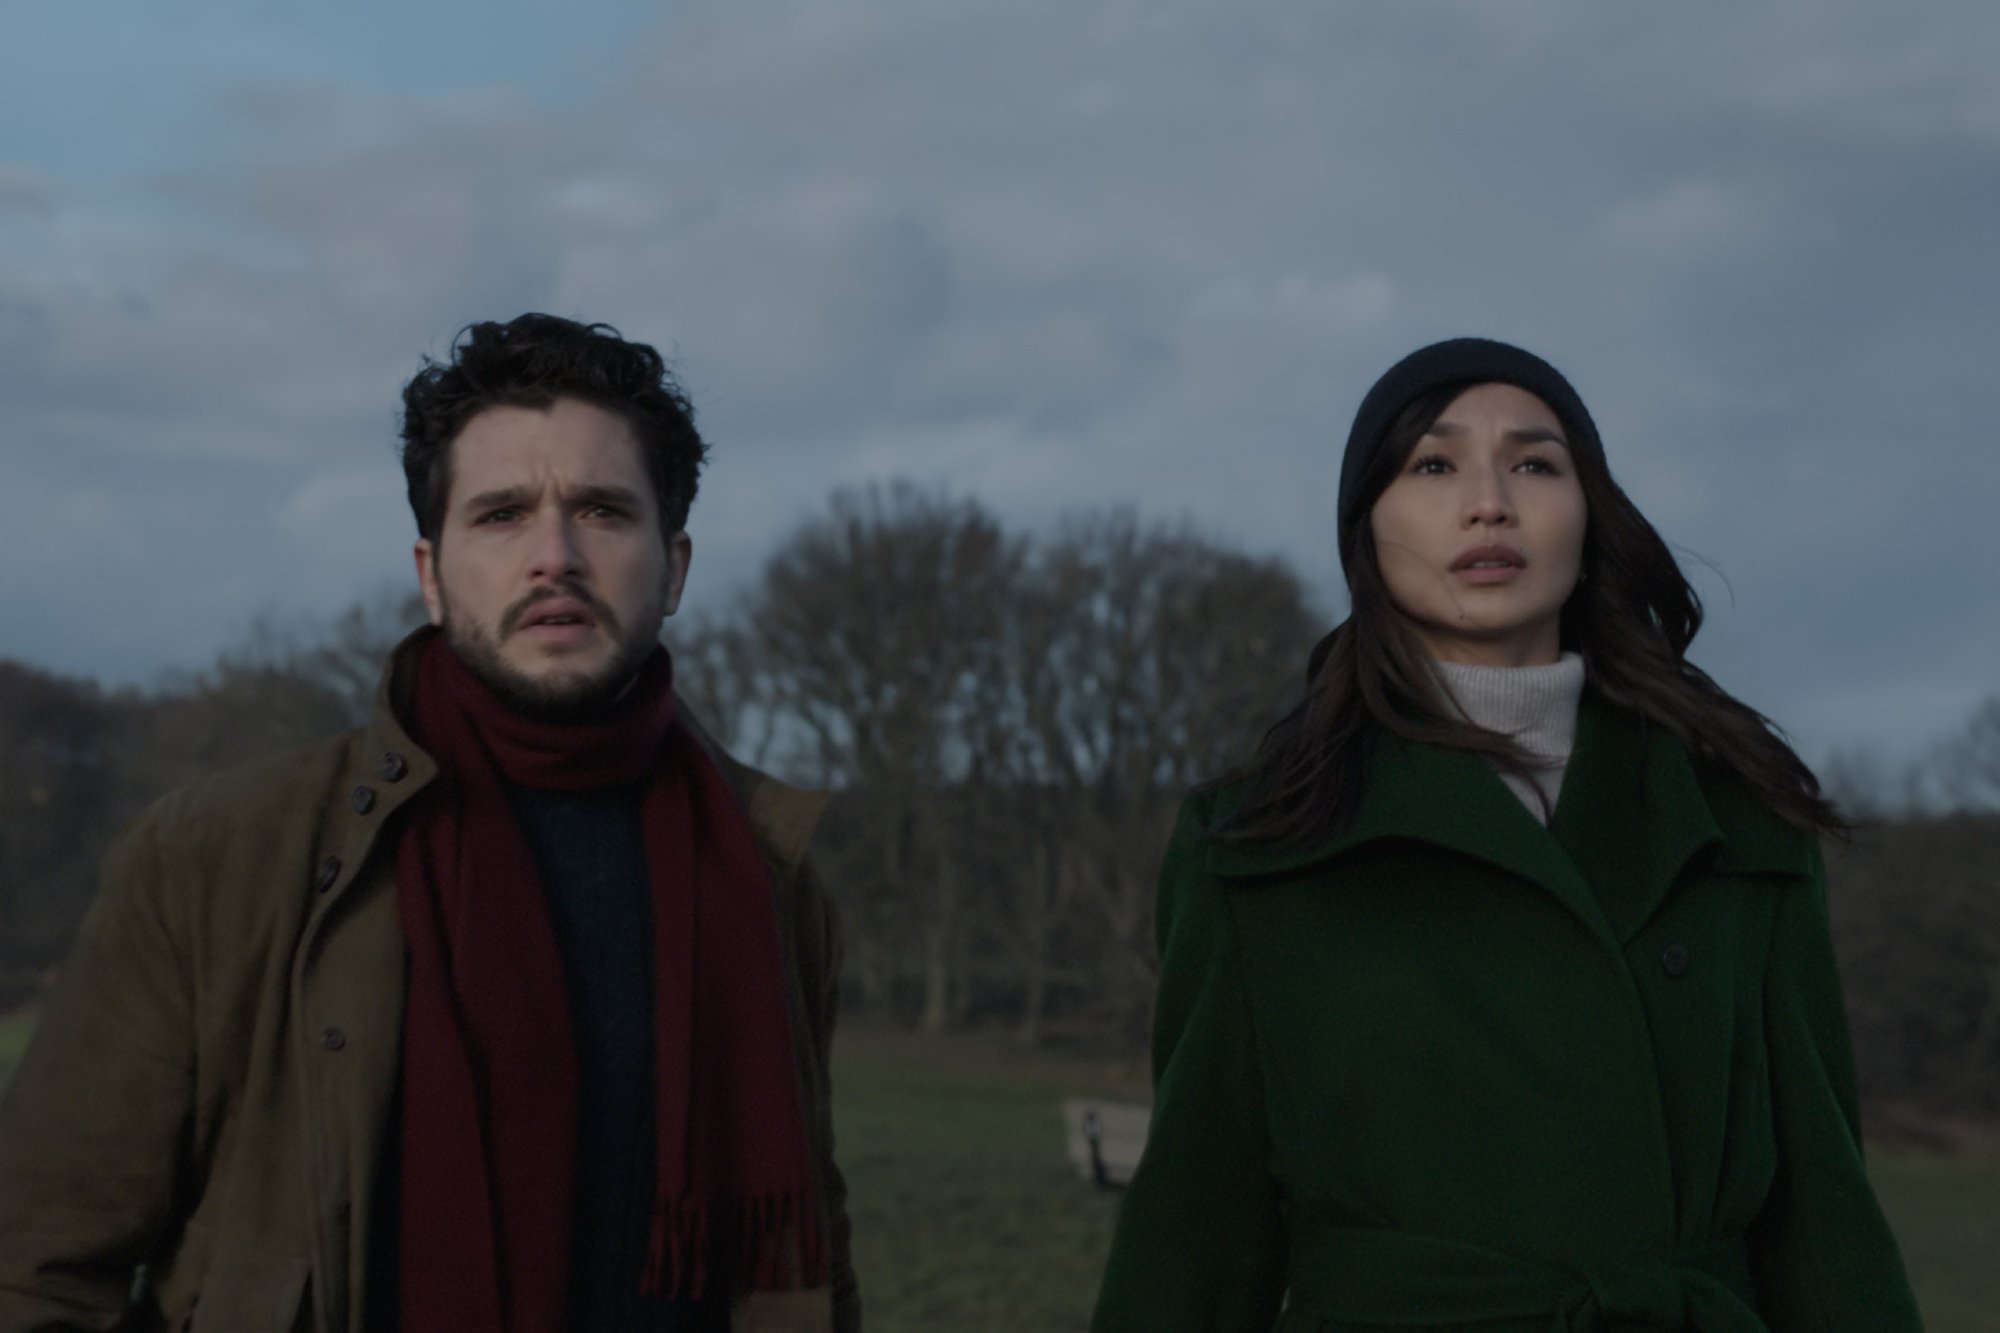 'Eternals': 'Game of Thrones' actor Kit Harington as Dane Whitman and Gemma Chan as Sersi looking shocked in a field